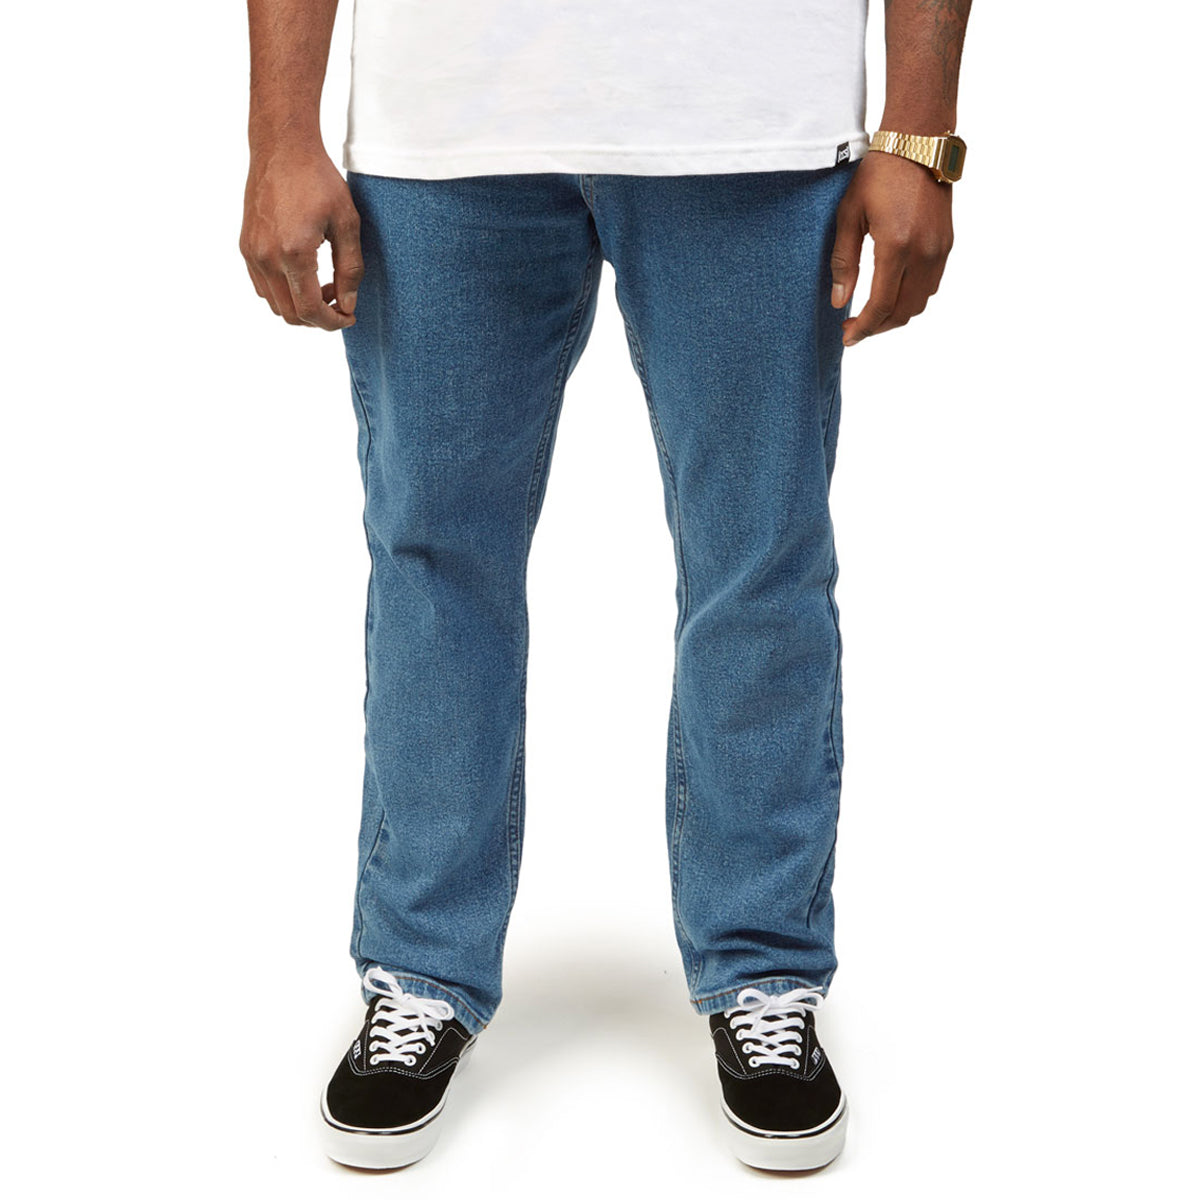 CCS 12oz Stretch Relaxed Denim Jeans - 12oz Rinse image 1